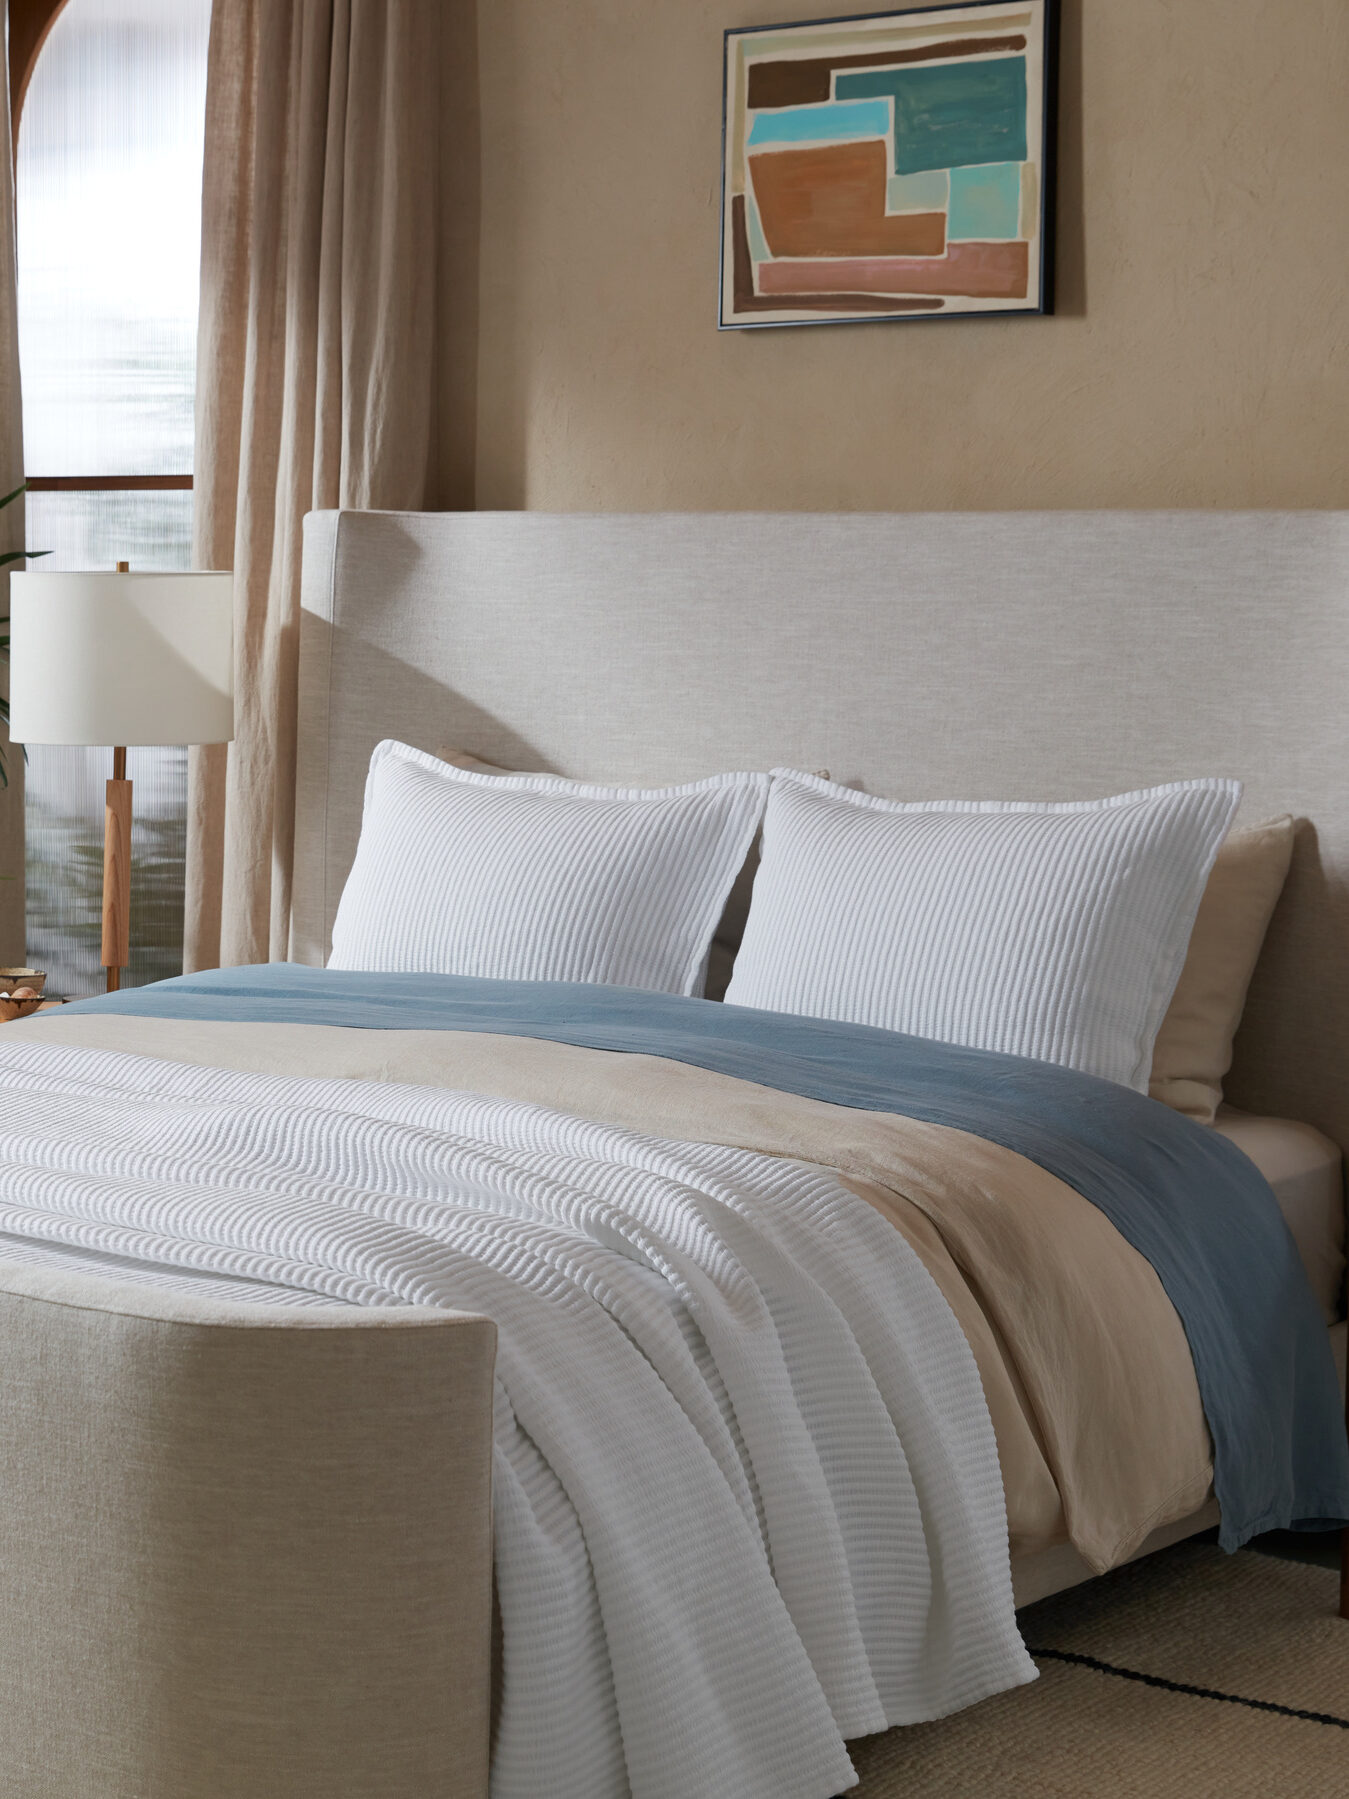 A neatly made bed in a stylish bedroom with a large plant, two nightstands, and framed artwork on the beige wall. The bed features a beige headboard and neutral bedding with blue and white pillows.